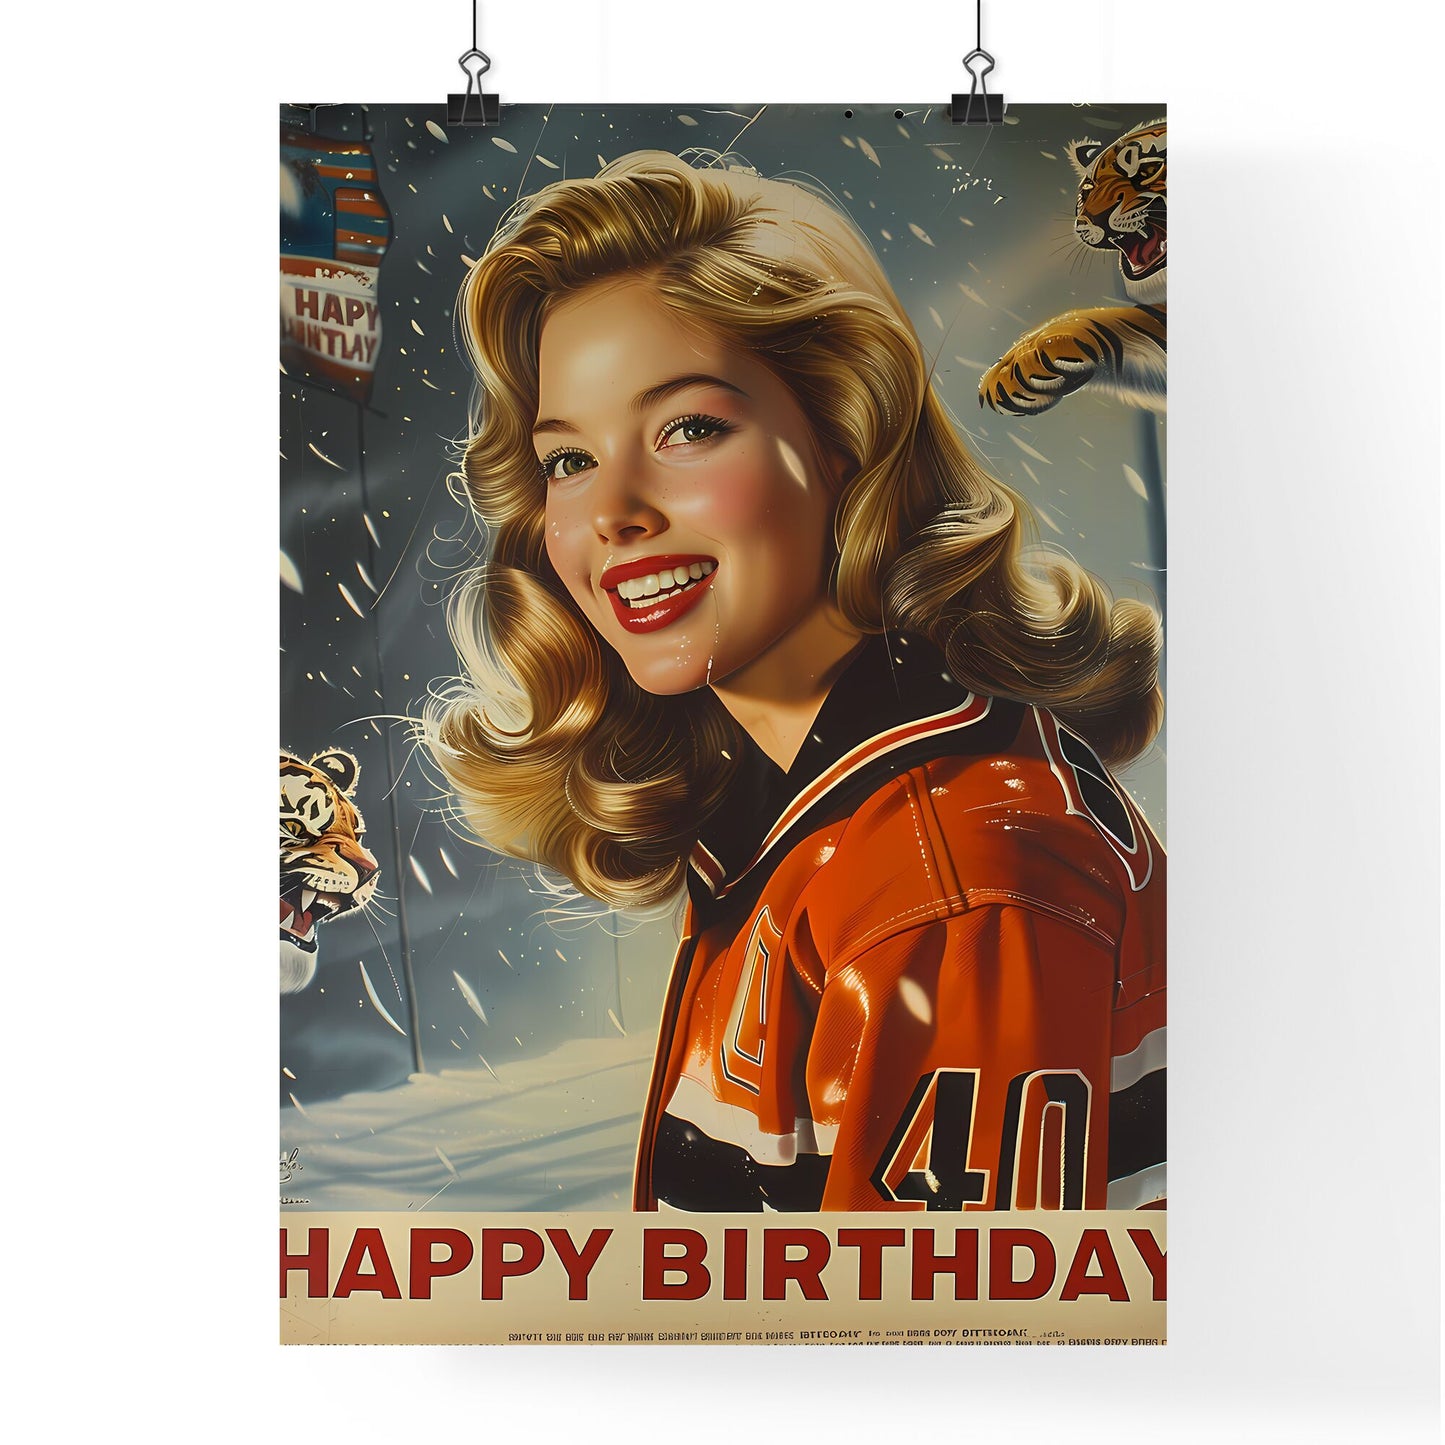 Vintage 1960s Happy Birthday Ice Hockey Ad: Blonde Princess, Tiger Logo, 1970s Illustration, Flying Tiger with Wings. Expertly Illustrated! Pink 40 Above. Red, White, Yellow Packaging. Artistic Vintage Advertising Poster! Default Title